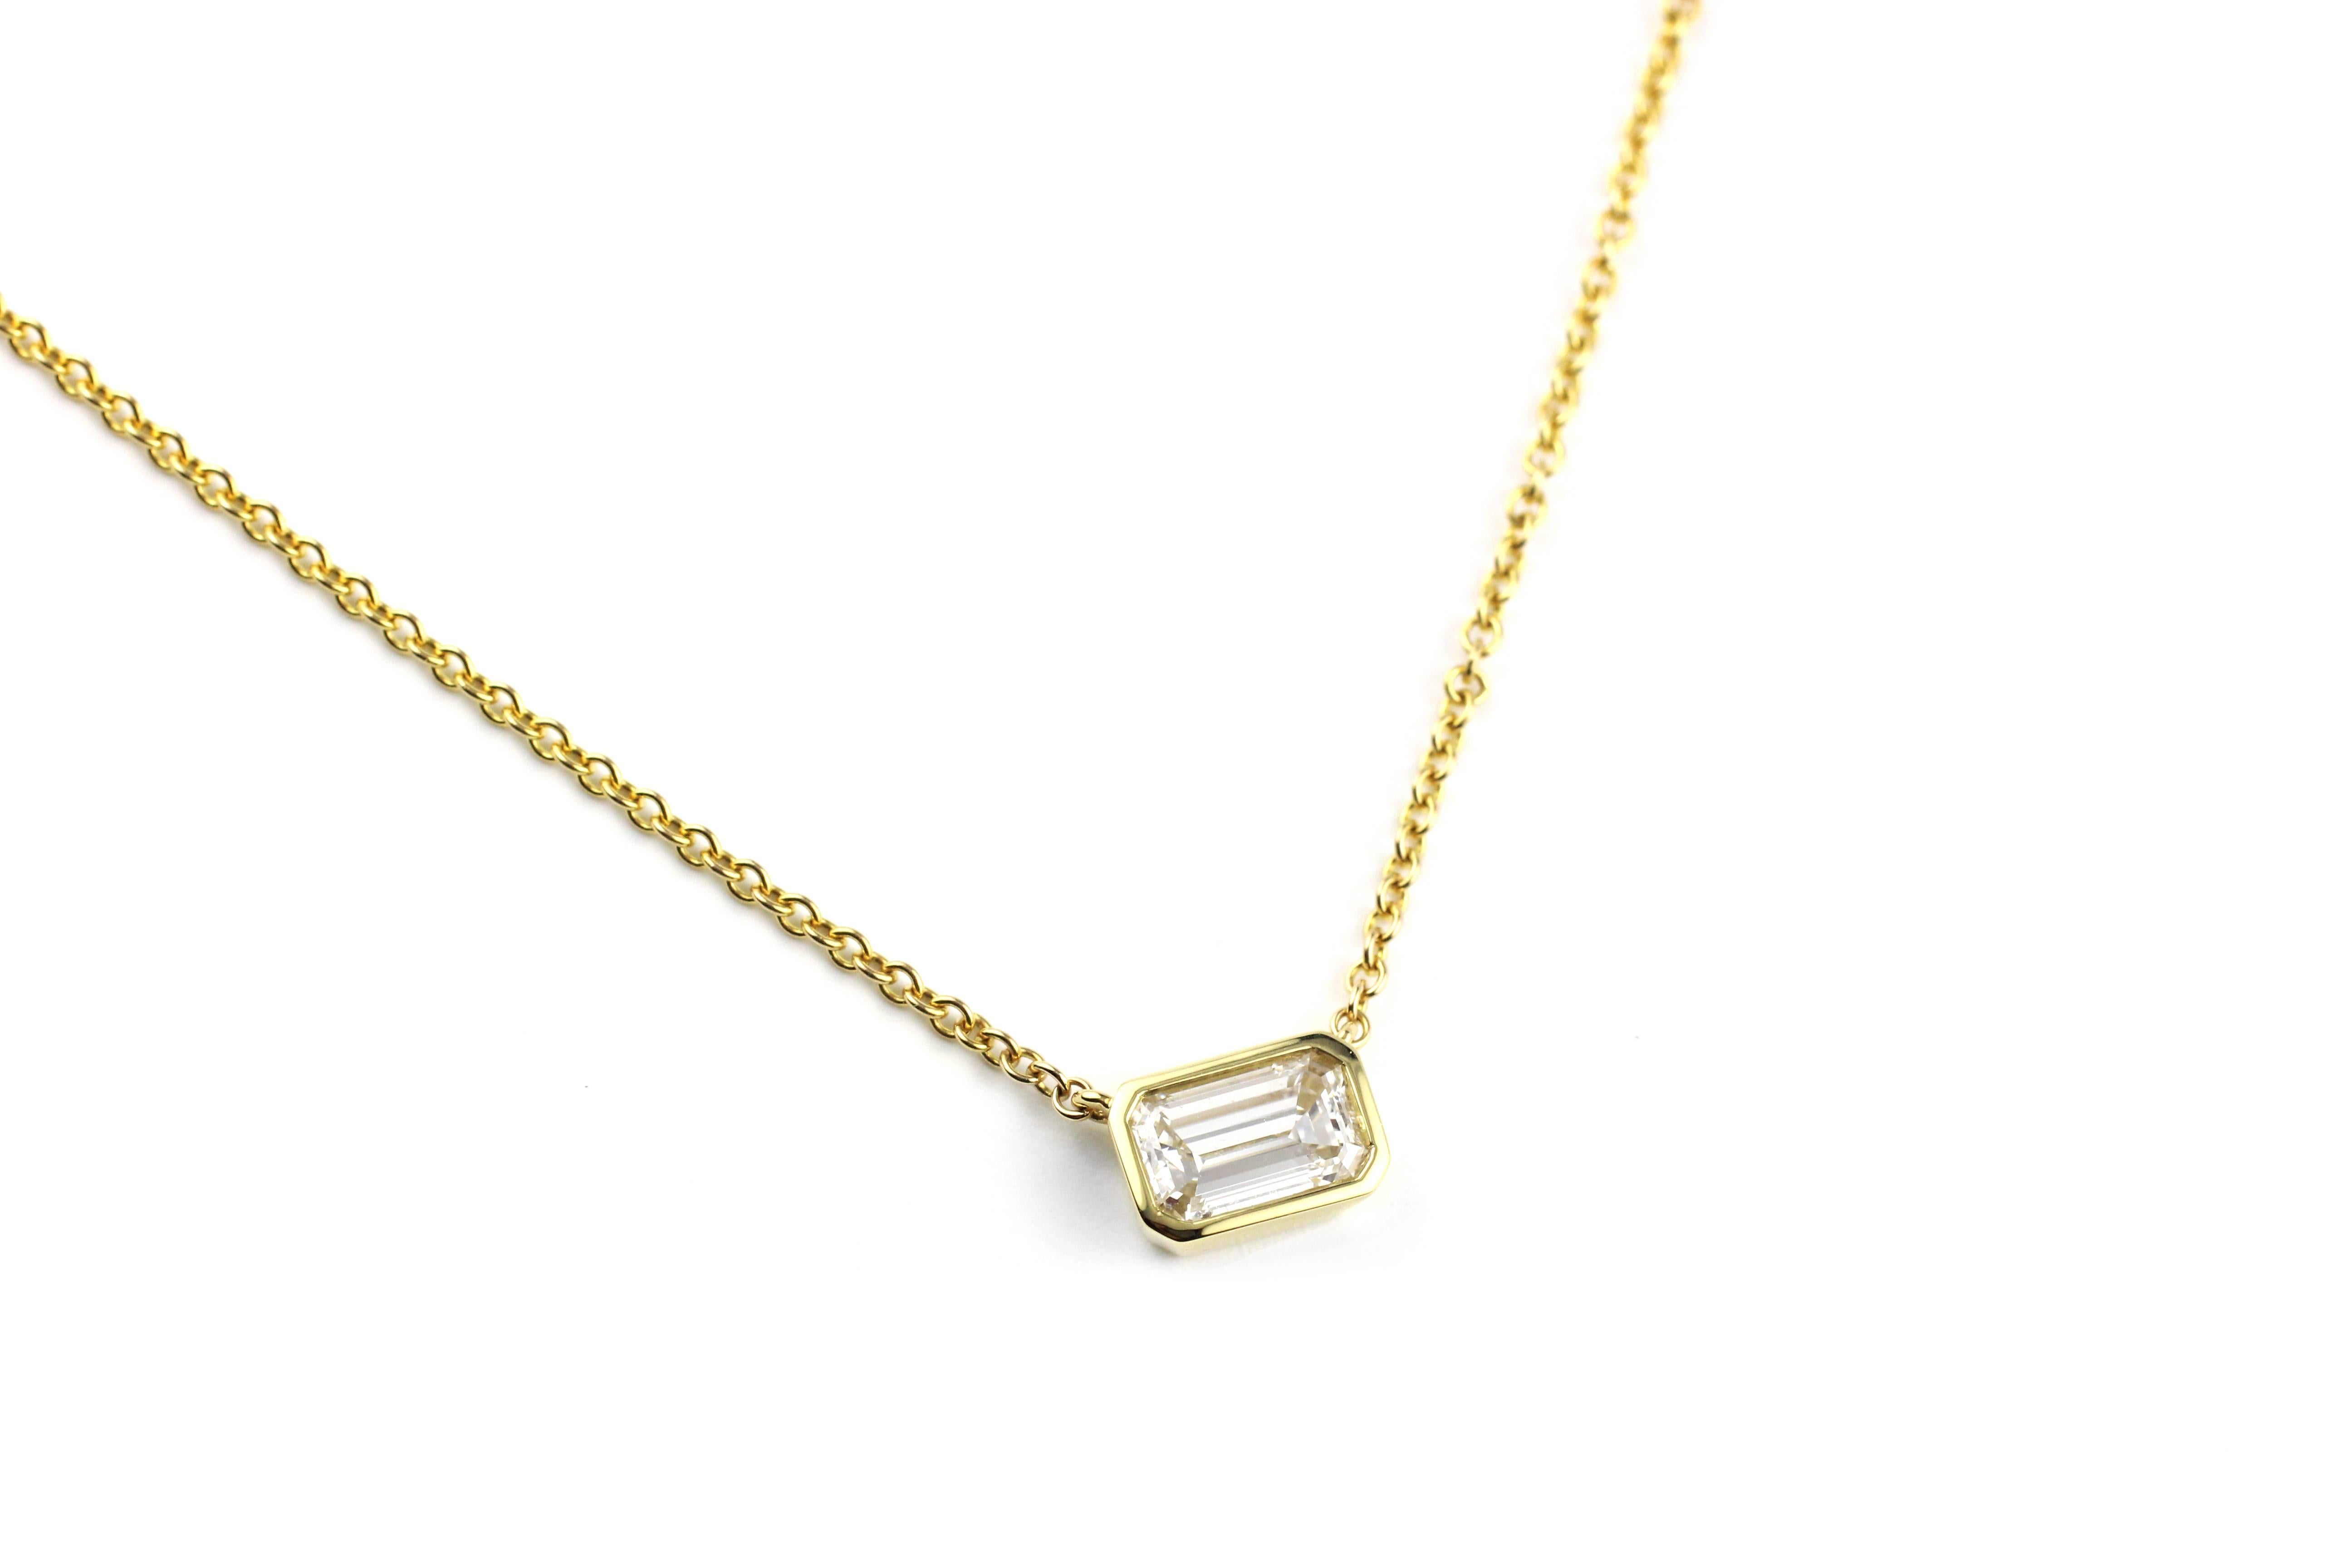 This elegant sparkler contains 1 very fine 1.08 Ct. Emerald Cut Diamond, GIA Certified D VS - 1.  A beautiful and bright stone set in a simple, modern 18 Kt Gold bezel.  Versatile and lovely. 

16 inch long, 18 Kt Gold chain.  

Designed and made